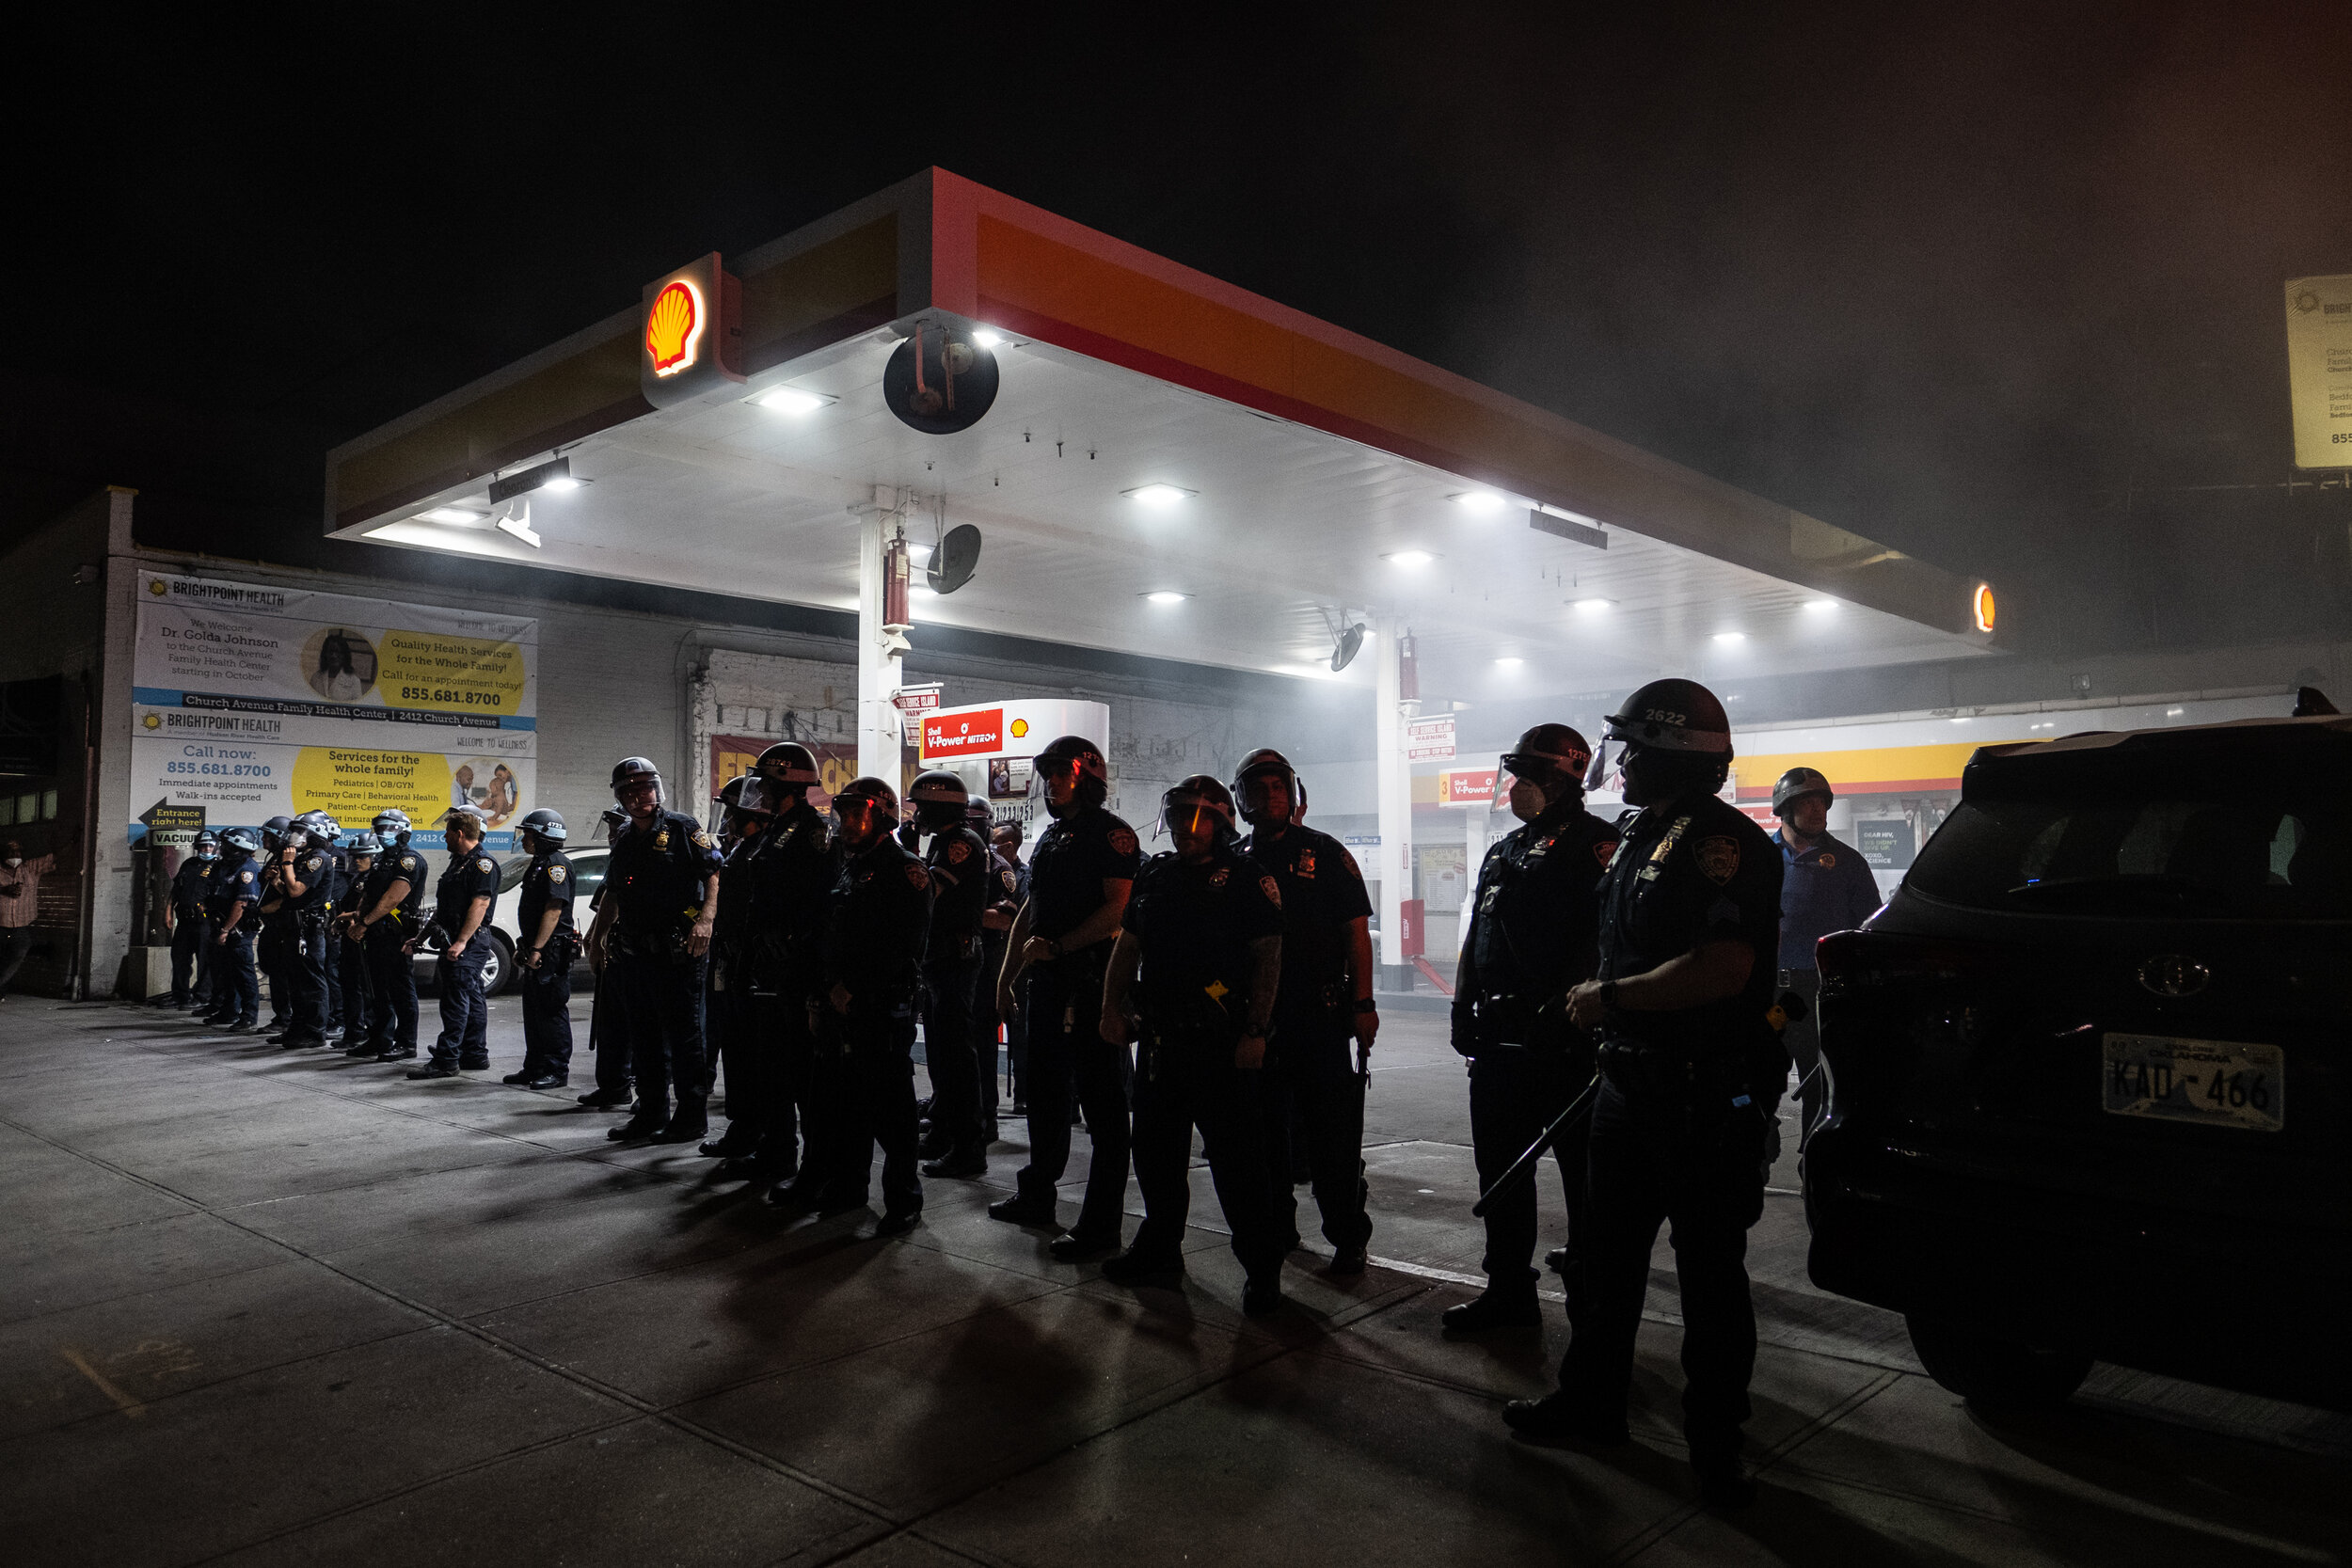  May 30, 2020: New York, NY -   Police block a gas station as protesters clash with NYPD officers in Flatbush, Brooklyn after George Floyd was killed while being detained by Minneapolis police on May 25.  